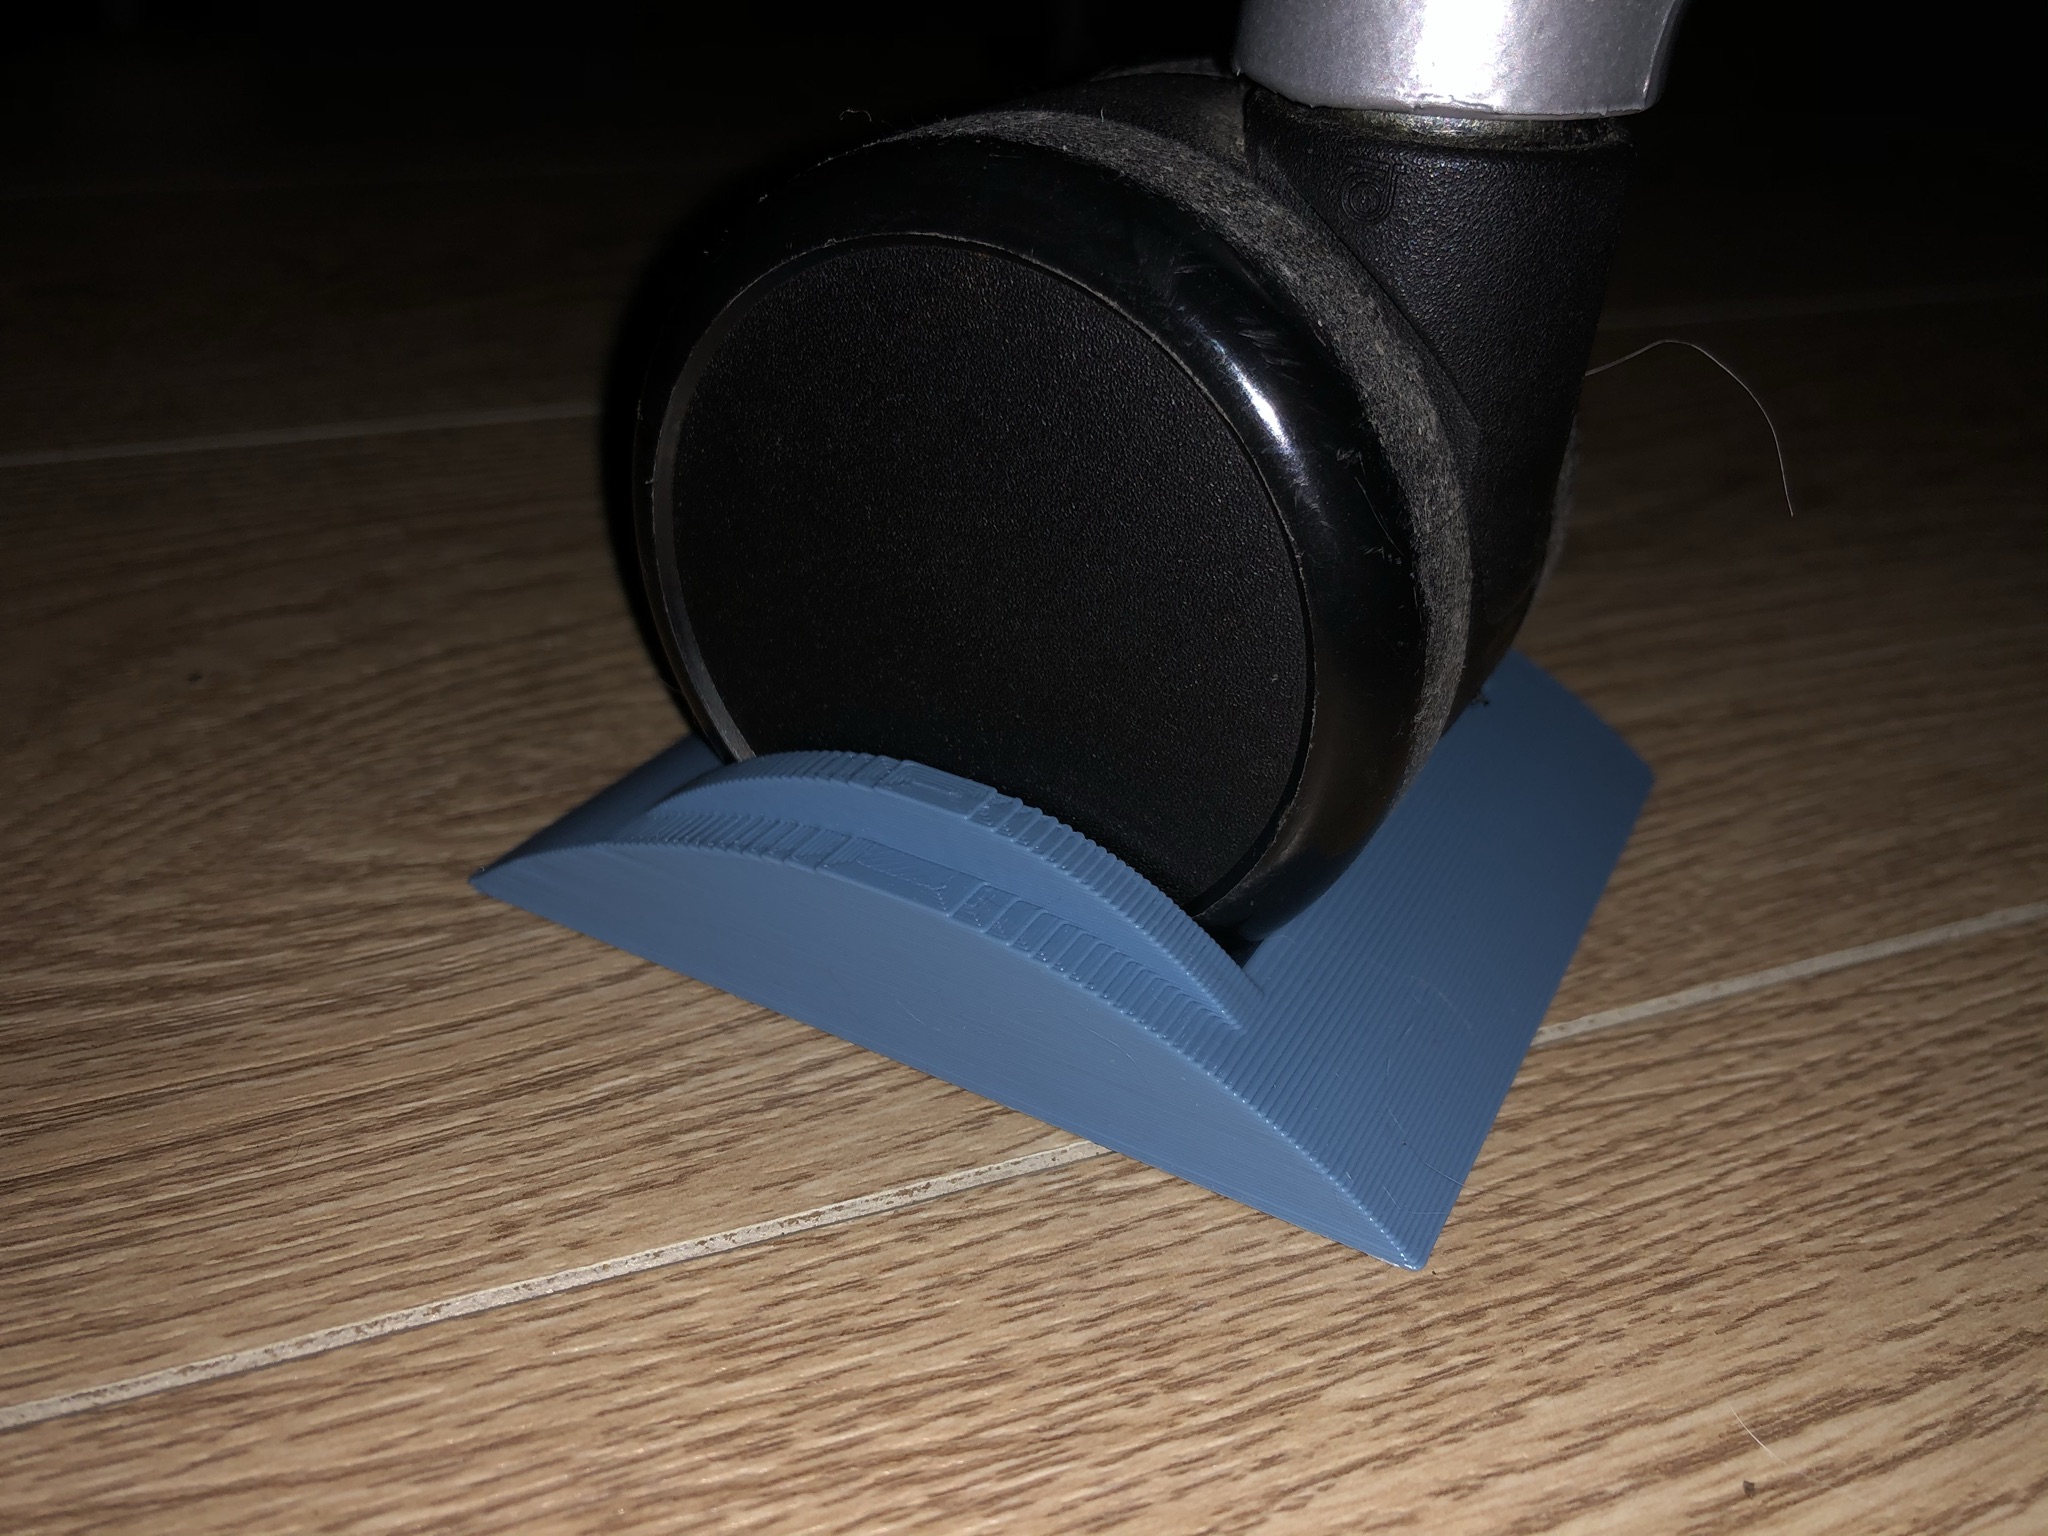 Chair chocks - Parking blocks for chairs with casters